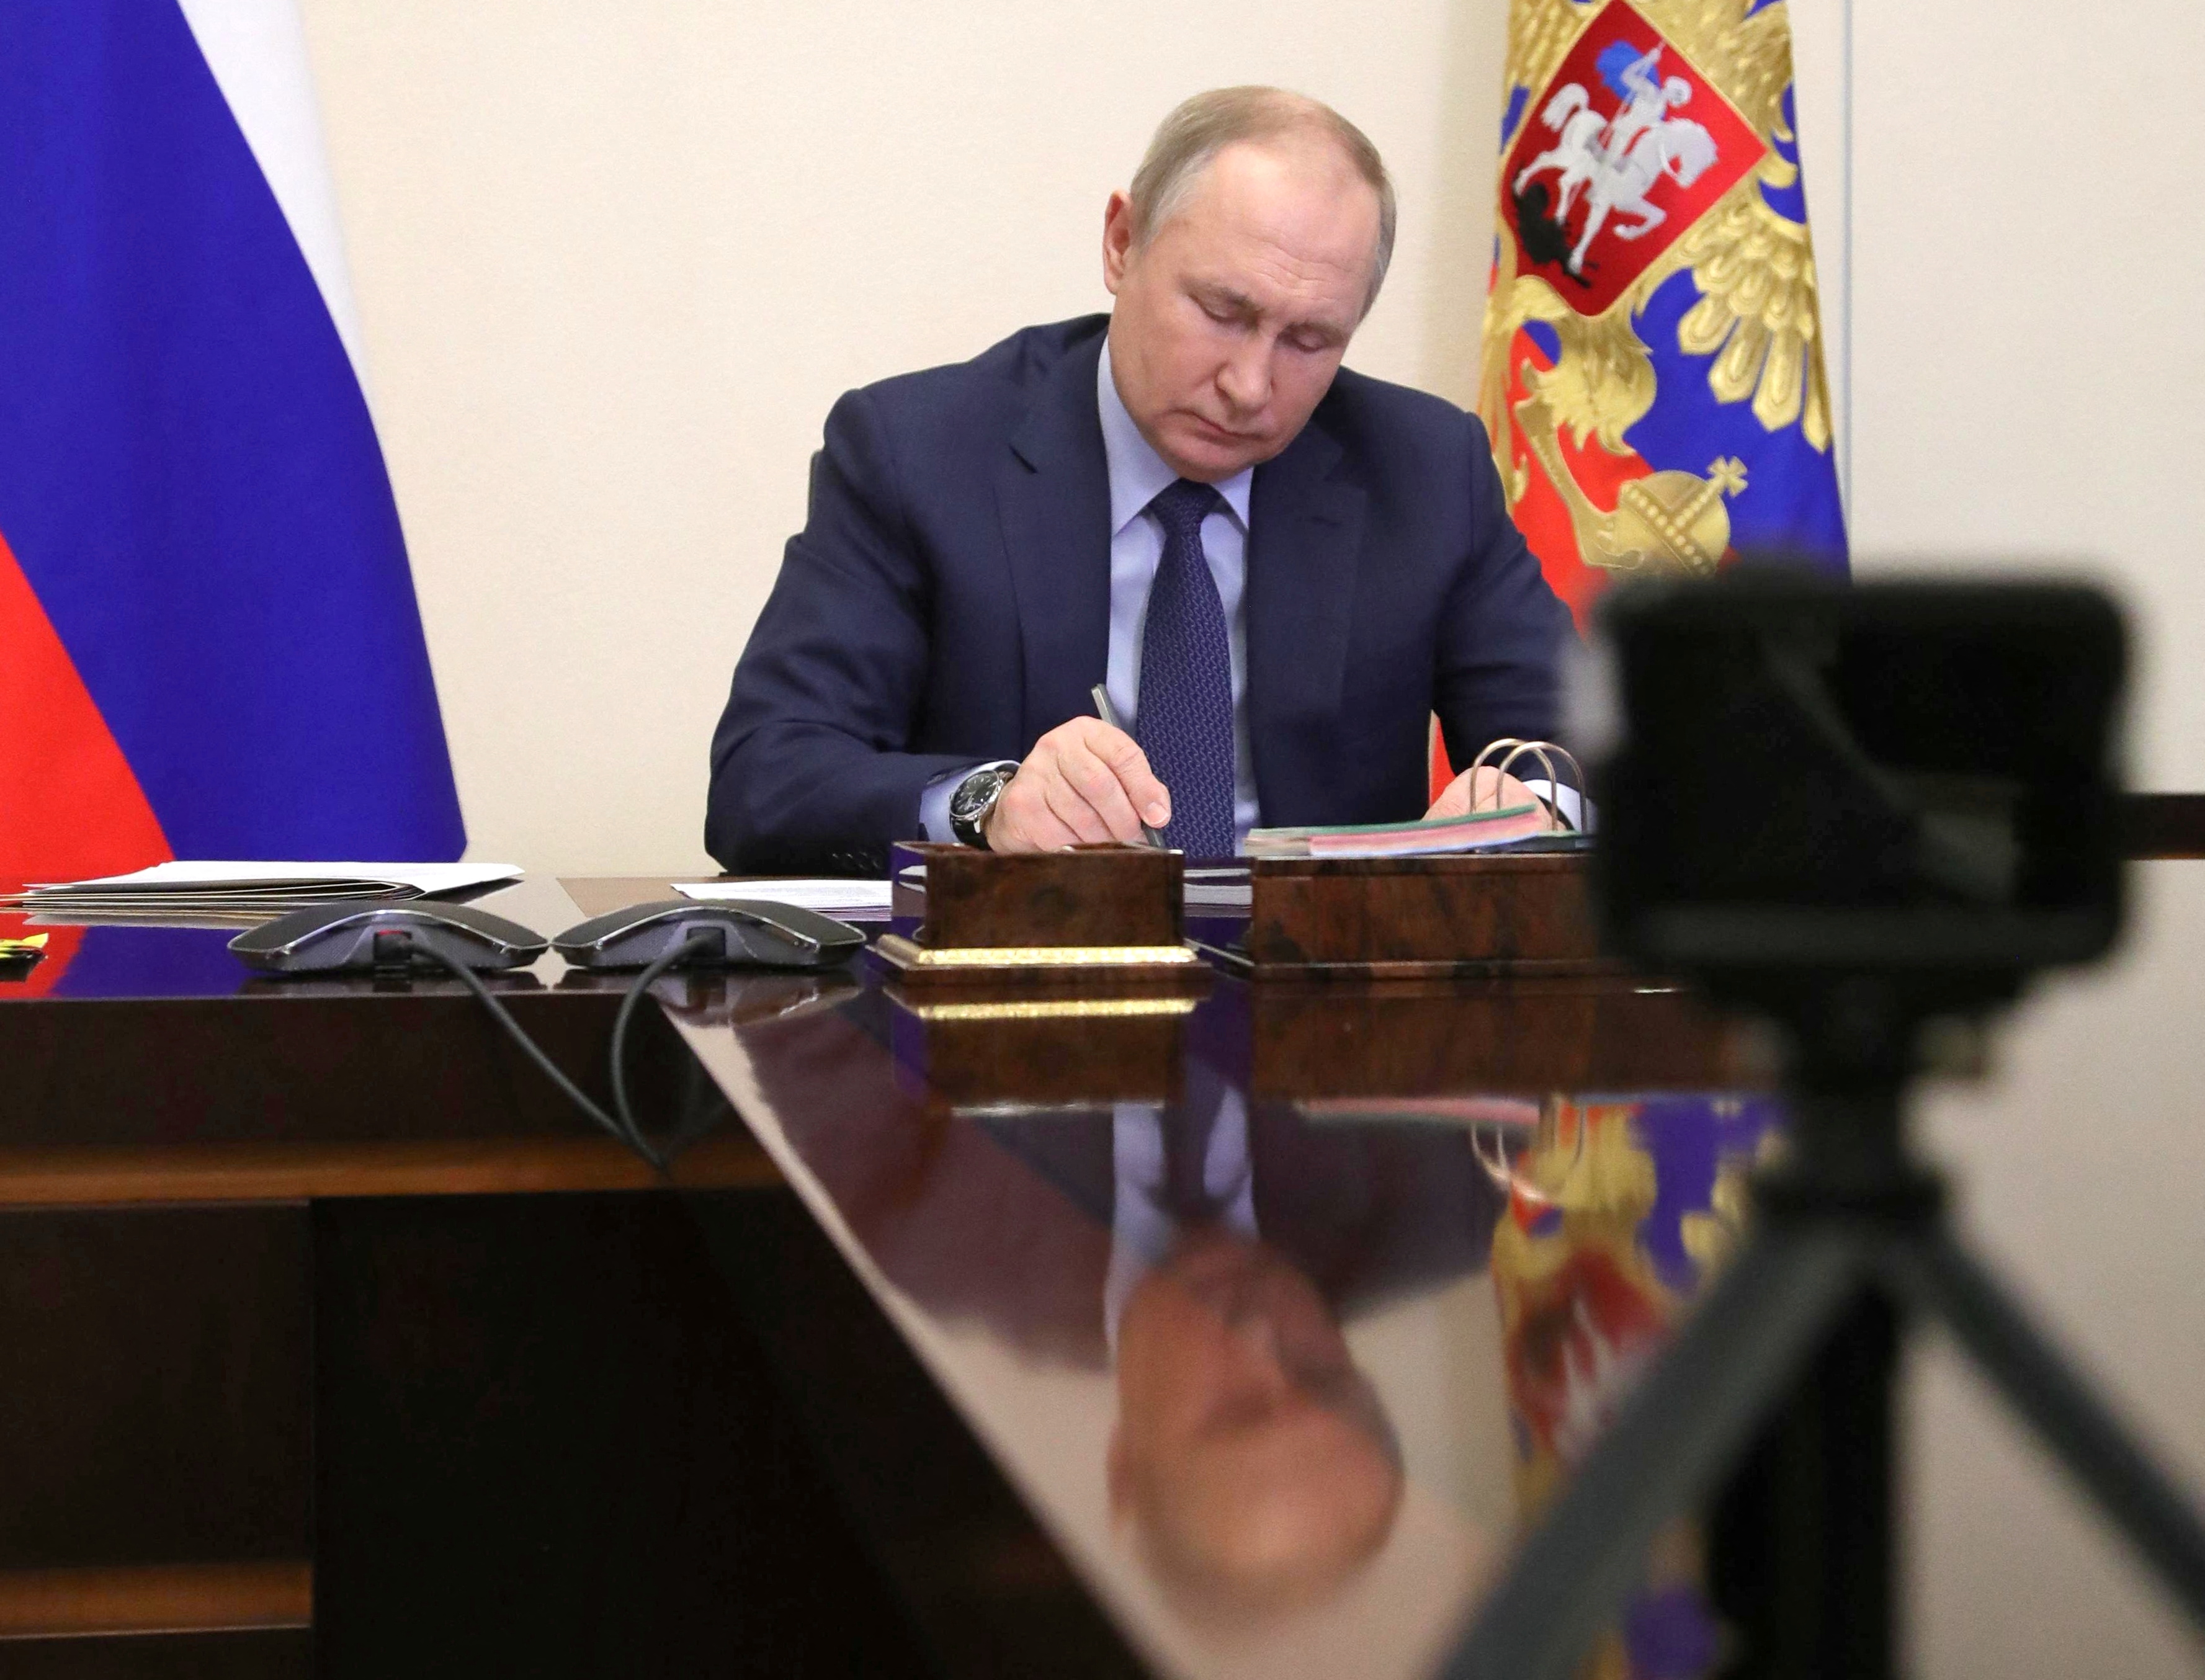 Russian President Vladimir Putin attends a meeting in Moscow